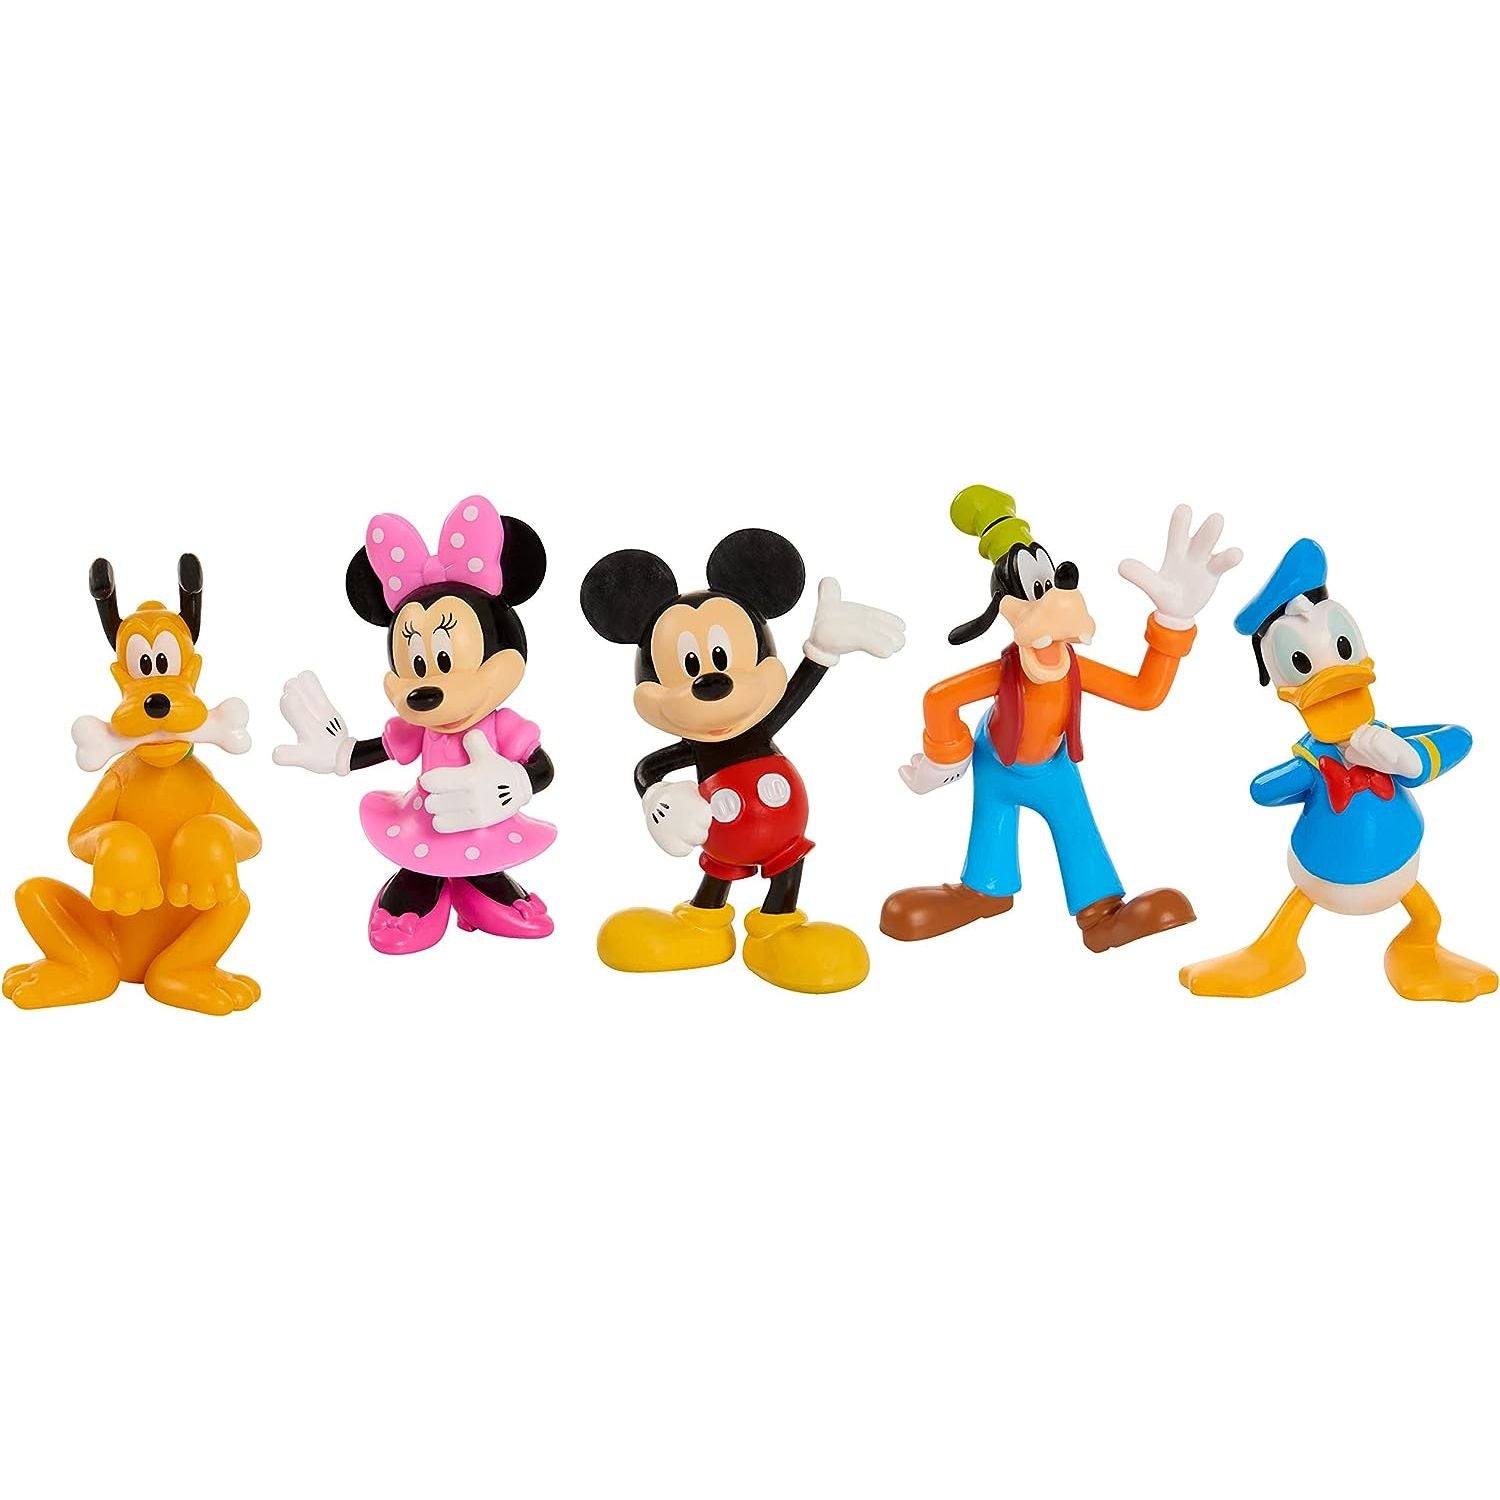 Mickey Mouse Collectible Figure Set, 5 Pack, Officially Licensed Kids Toys